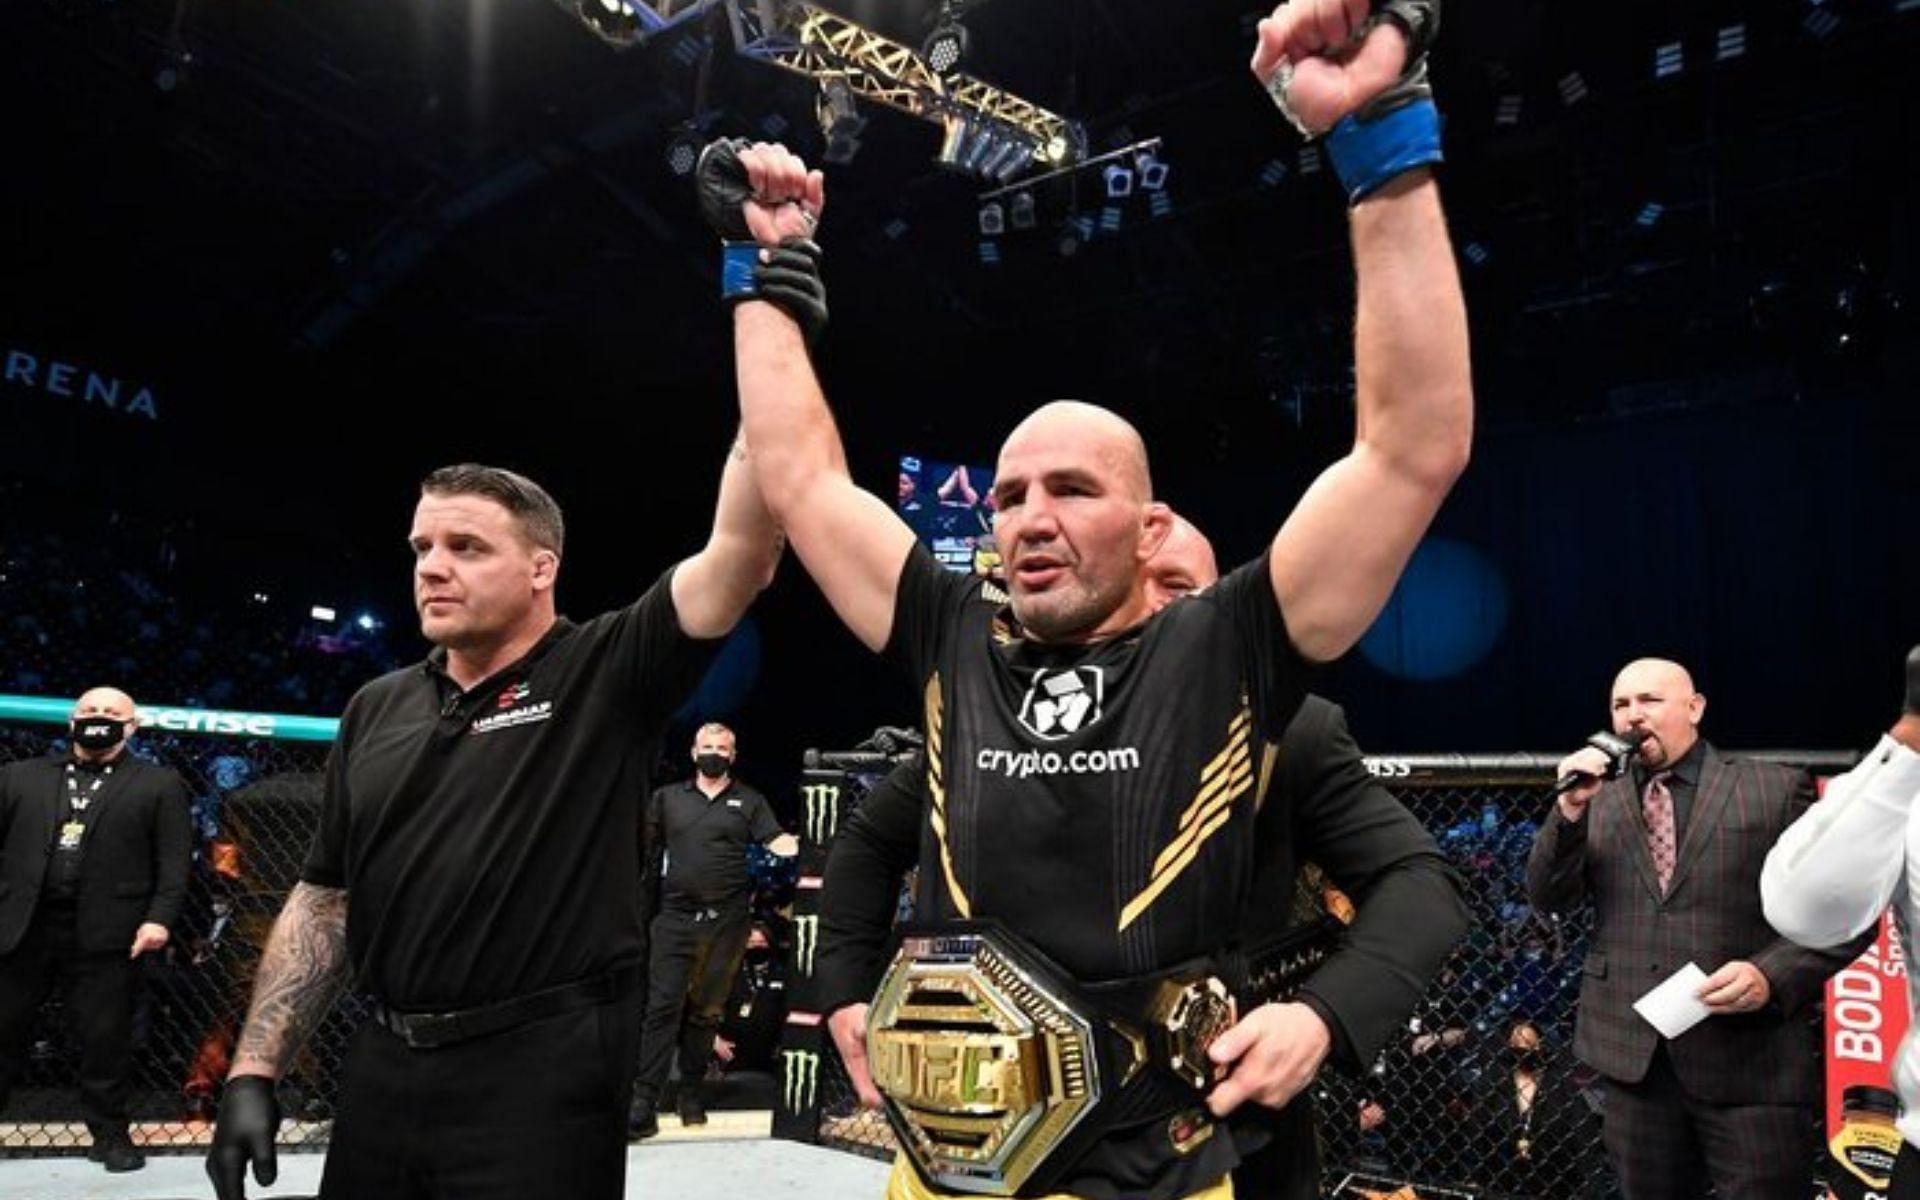 Glover Teixeira defied father time to capture gold in the octagon in 2021